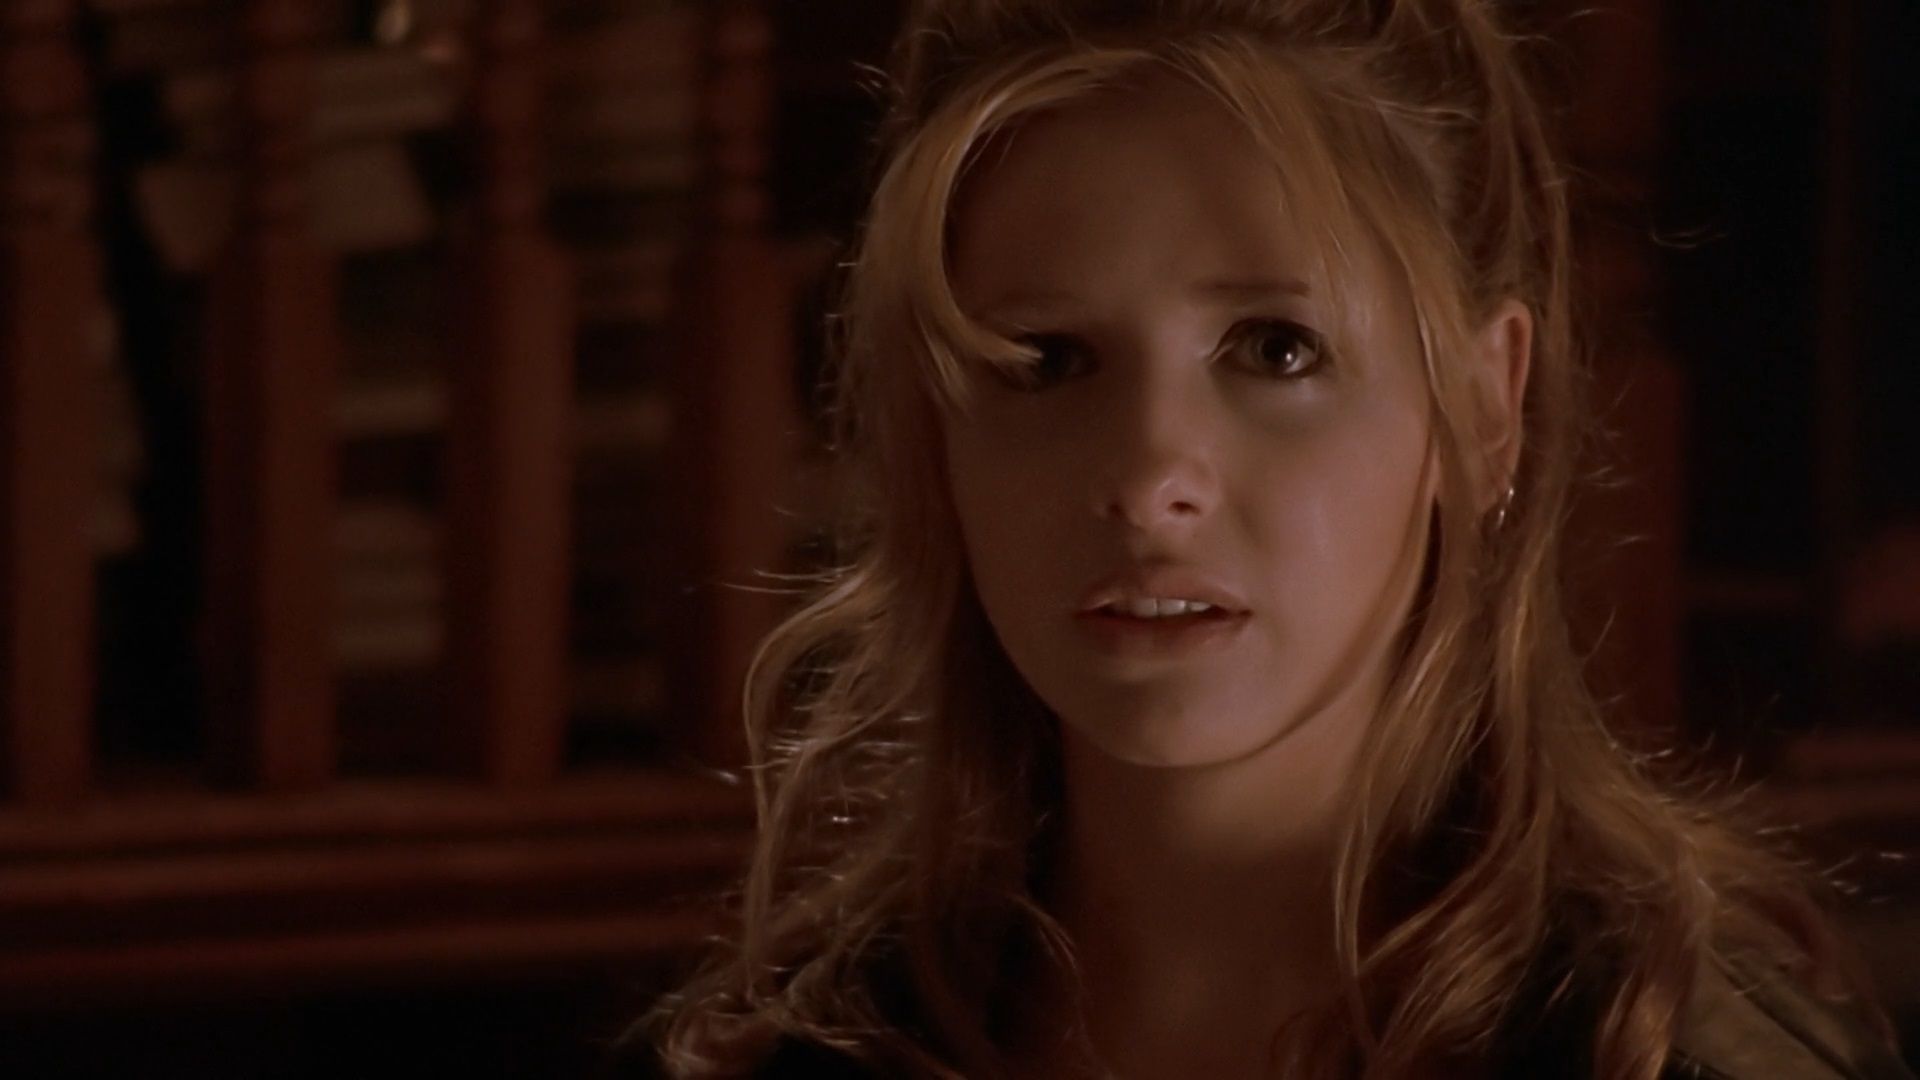 Buffy in the episode "Prophecy Girl".